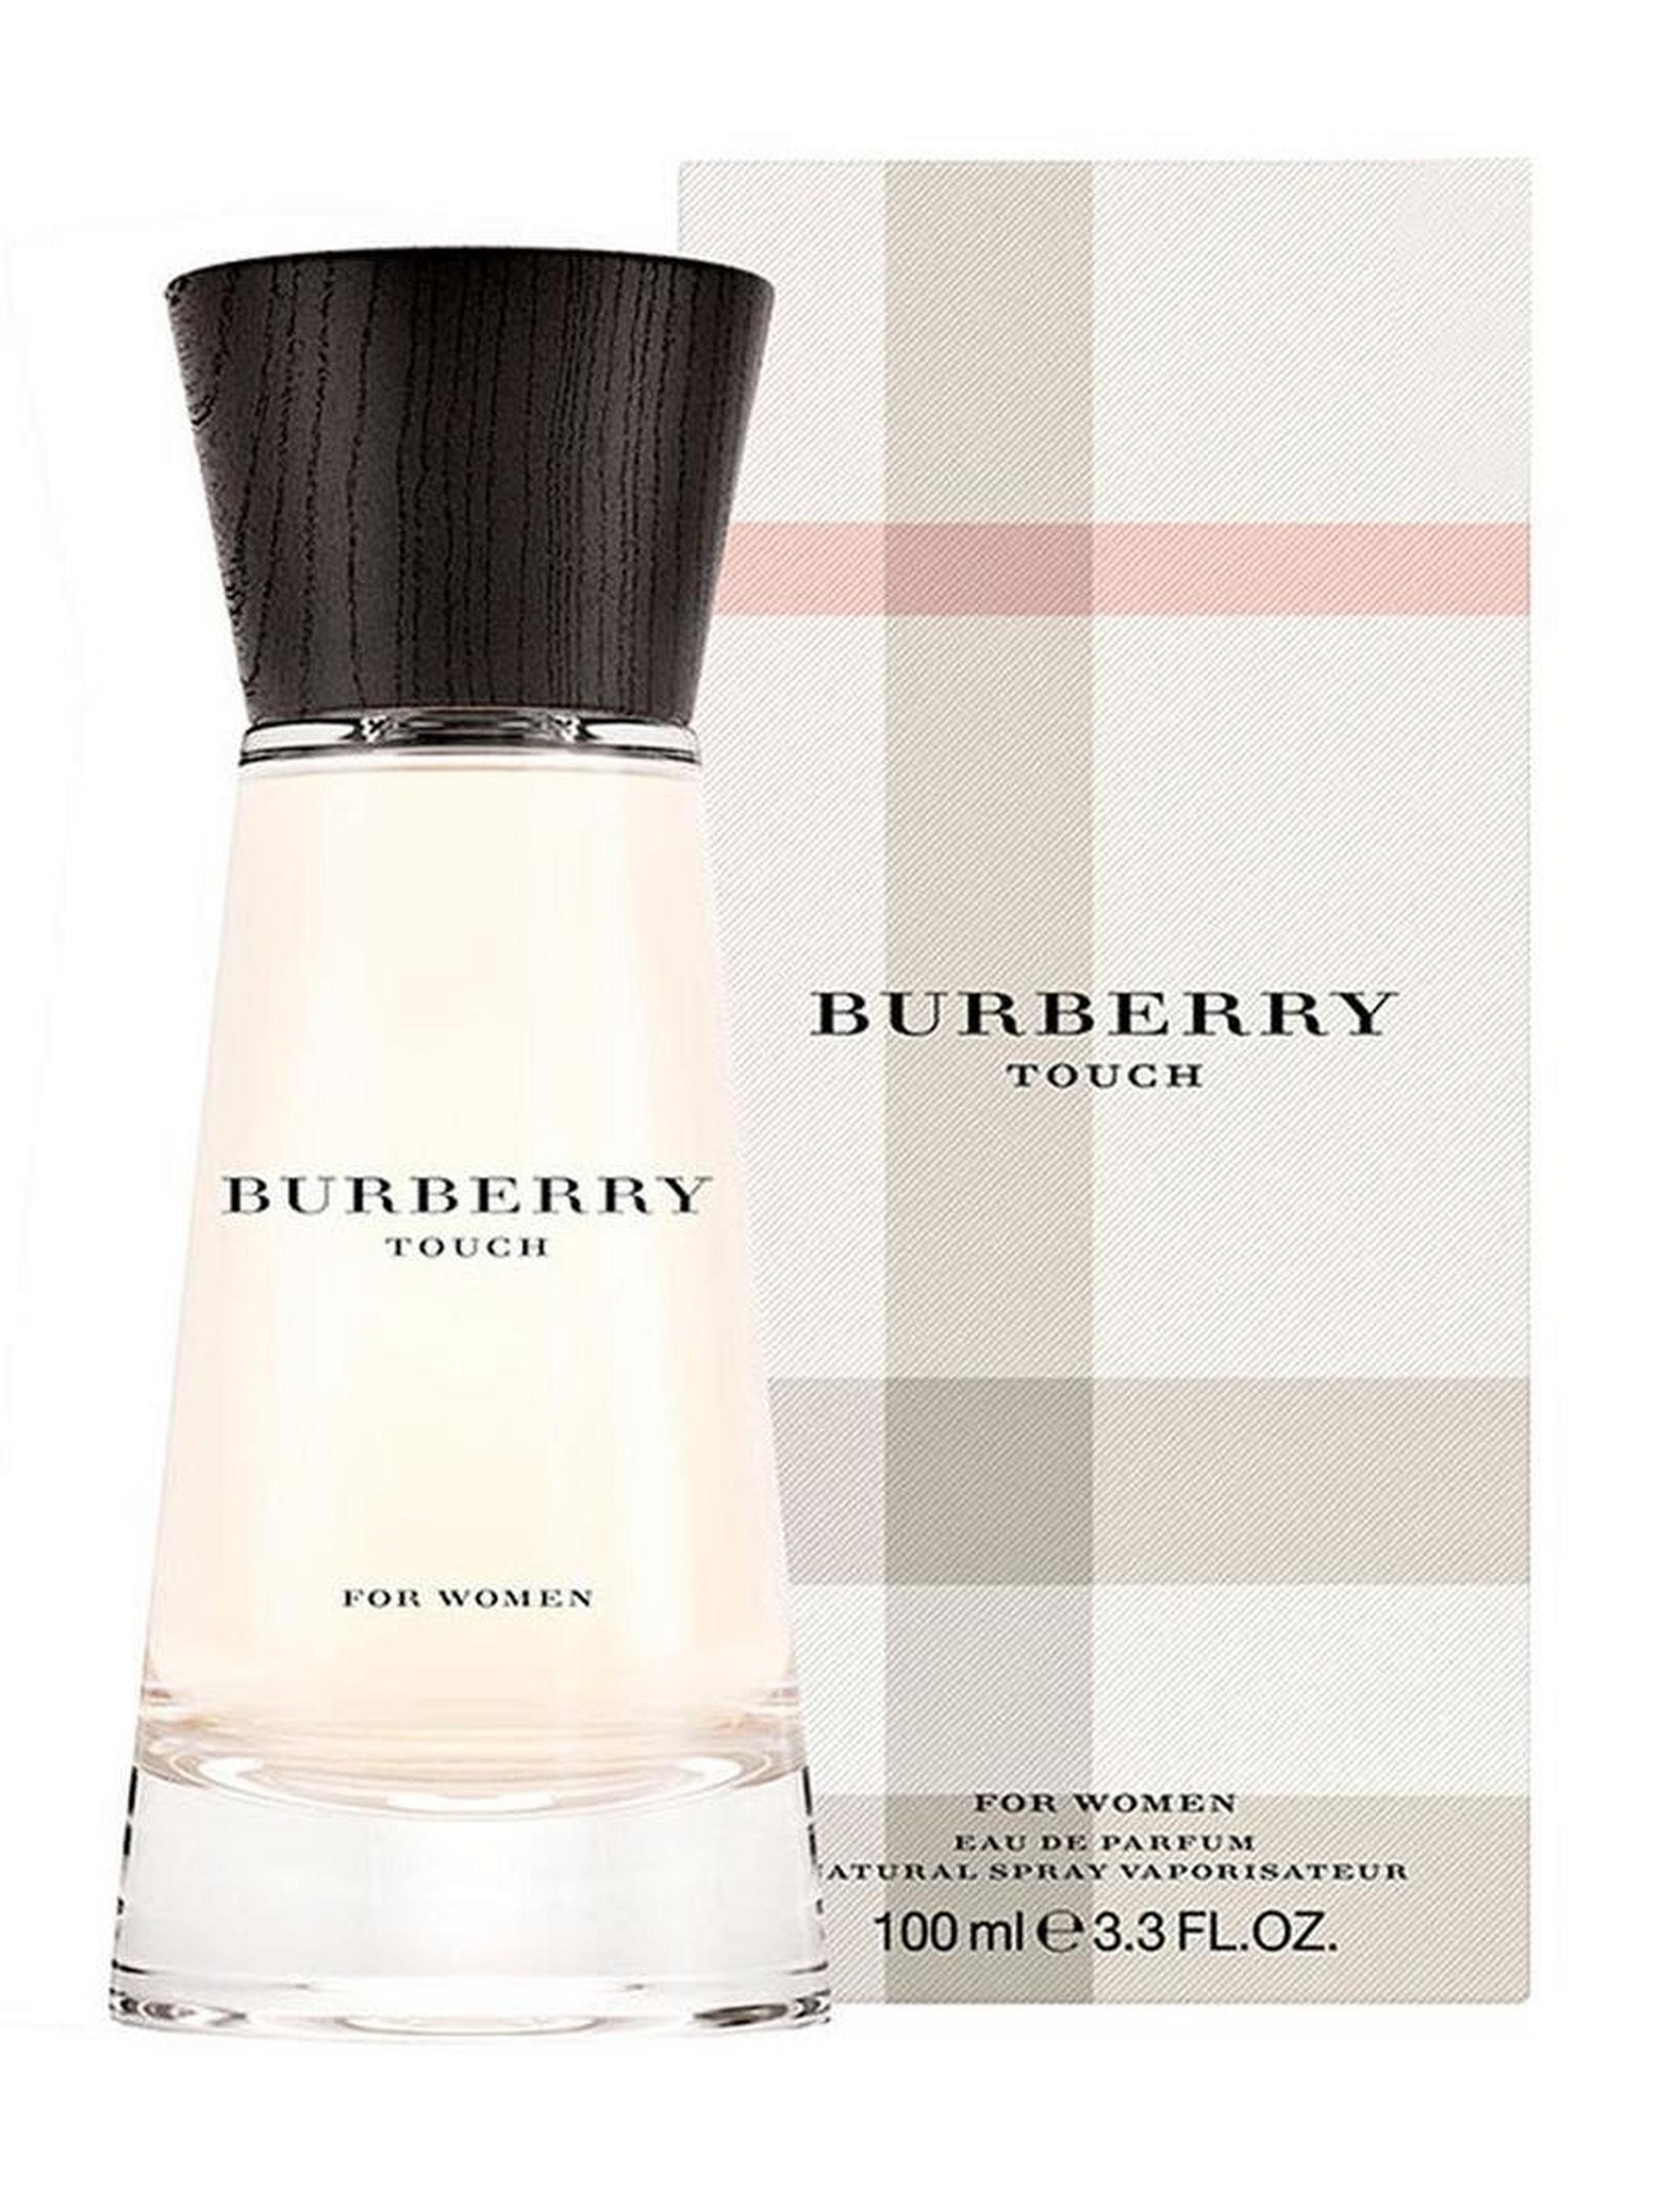 Burberry Touch EDP for Women 100 ml Perfume